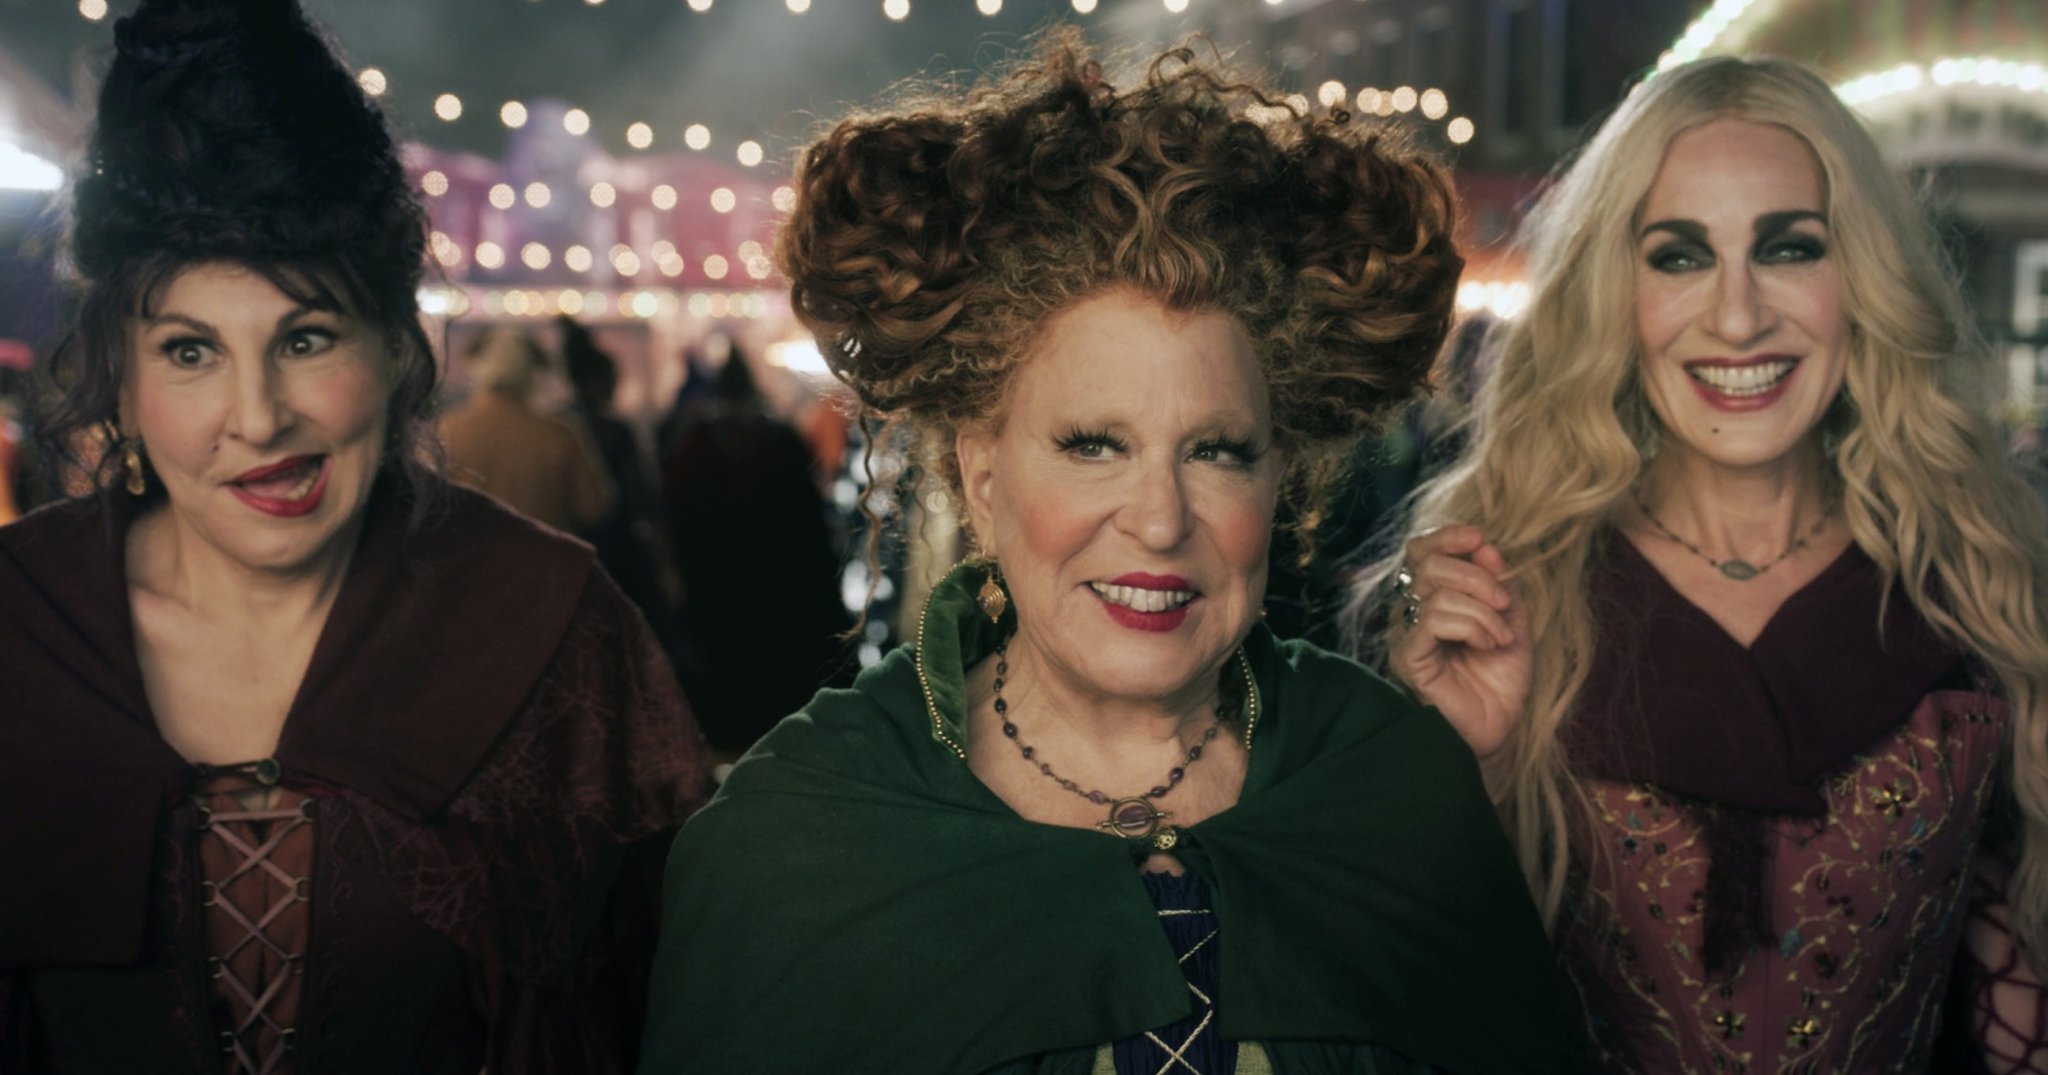 Did You Spot These Witchy Easter Eggs Hidden in "Hocus Pocus 2"?